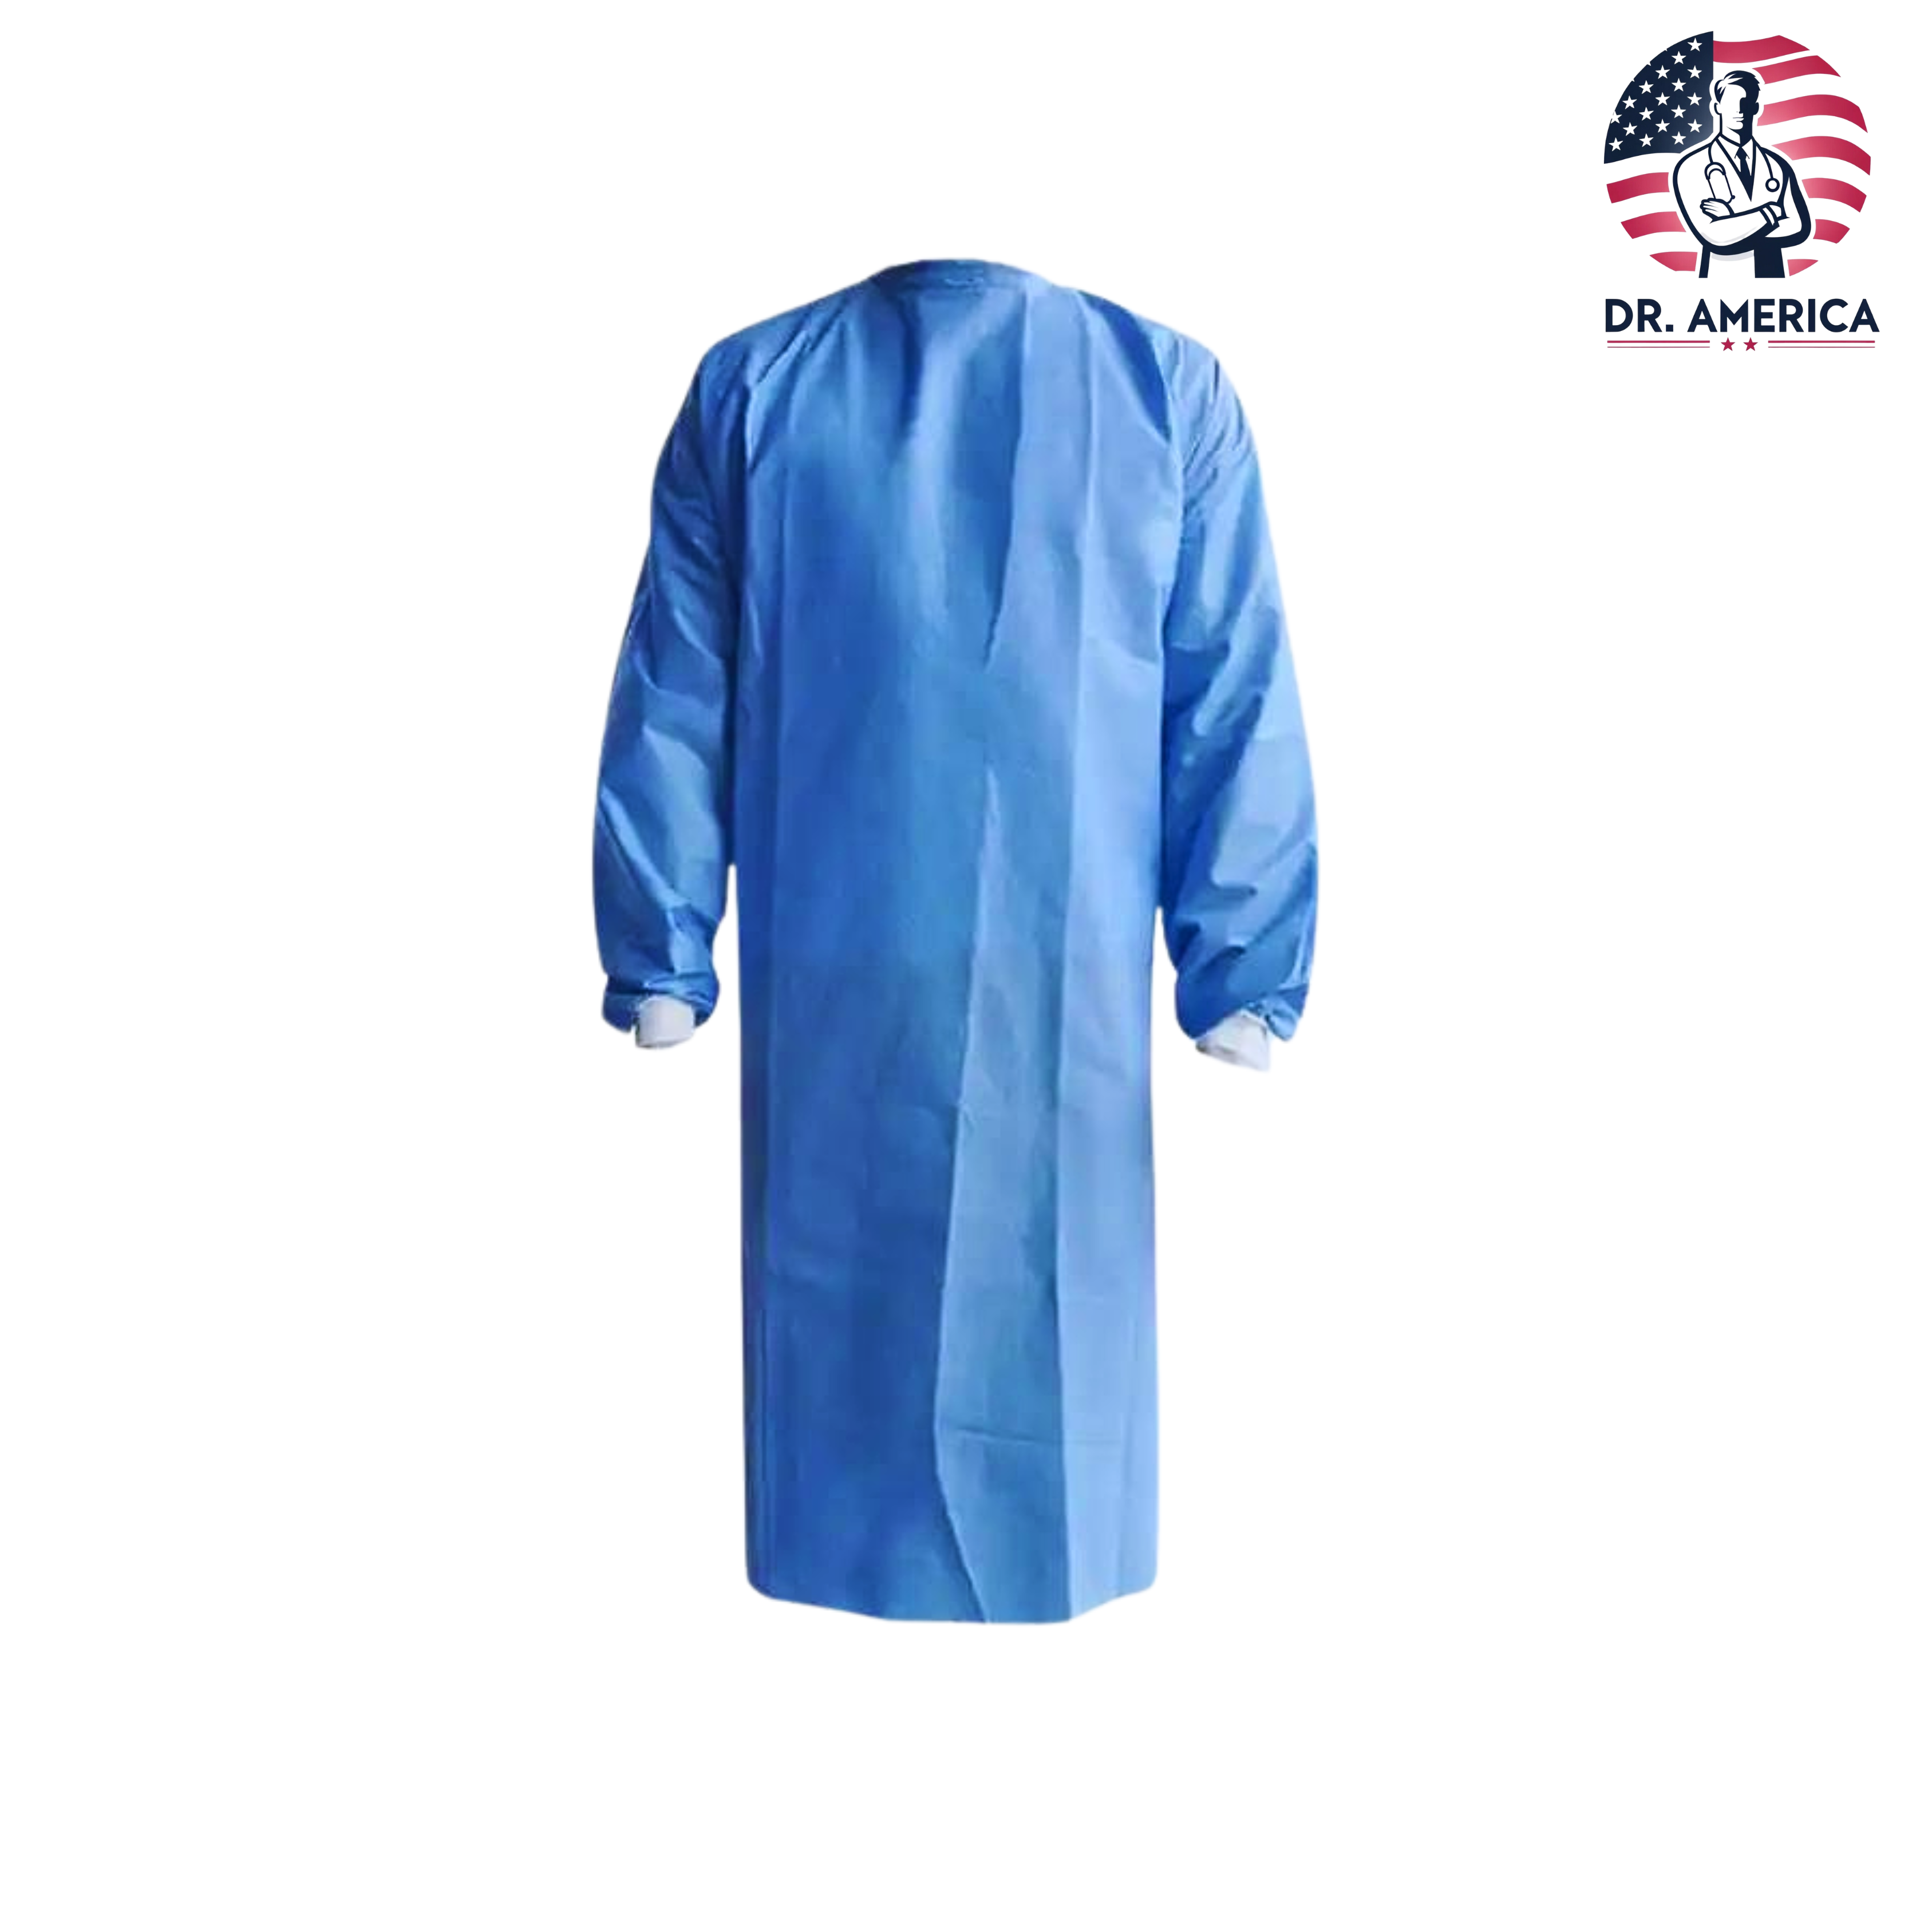 Dr. America Reusable Surgical Gowns